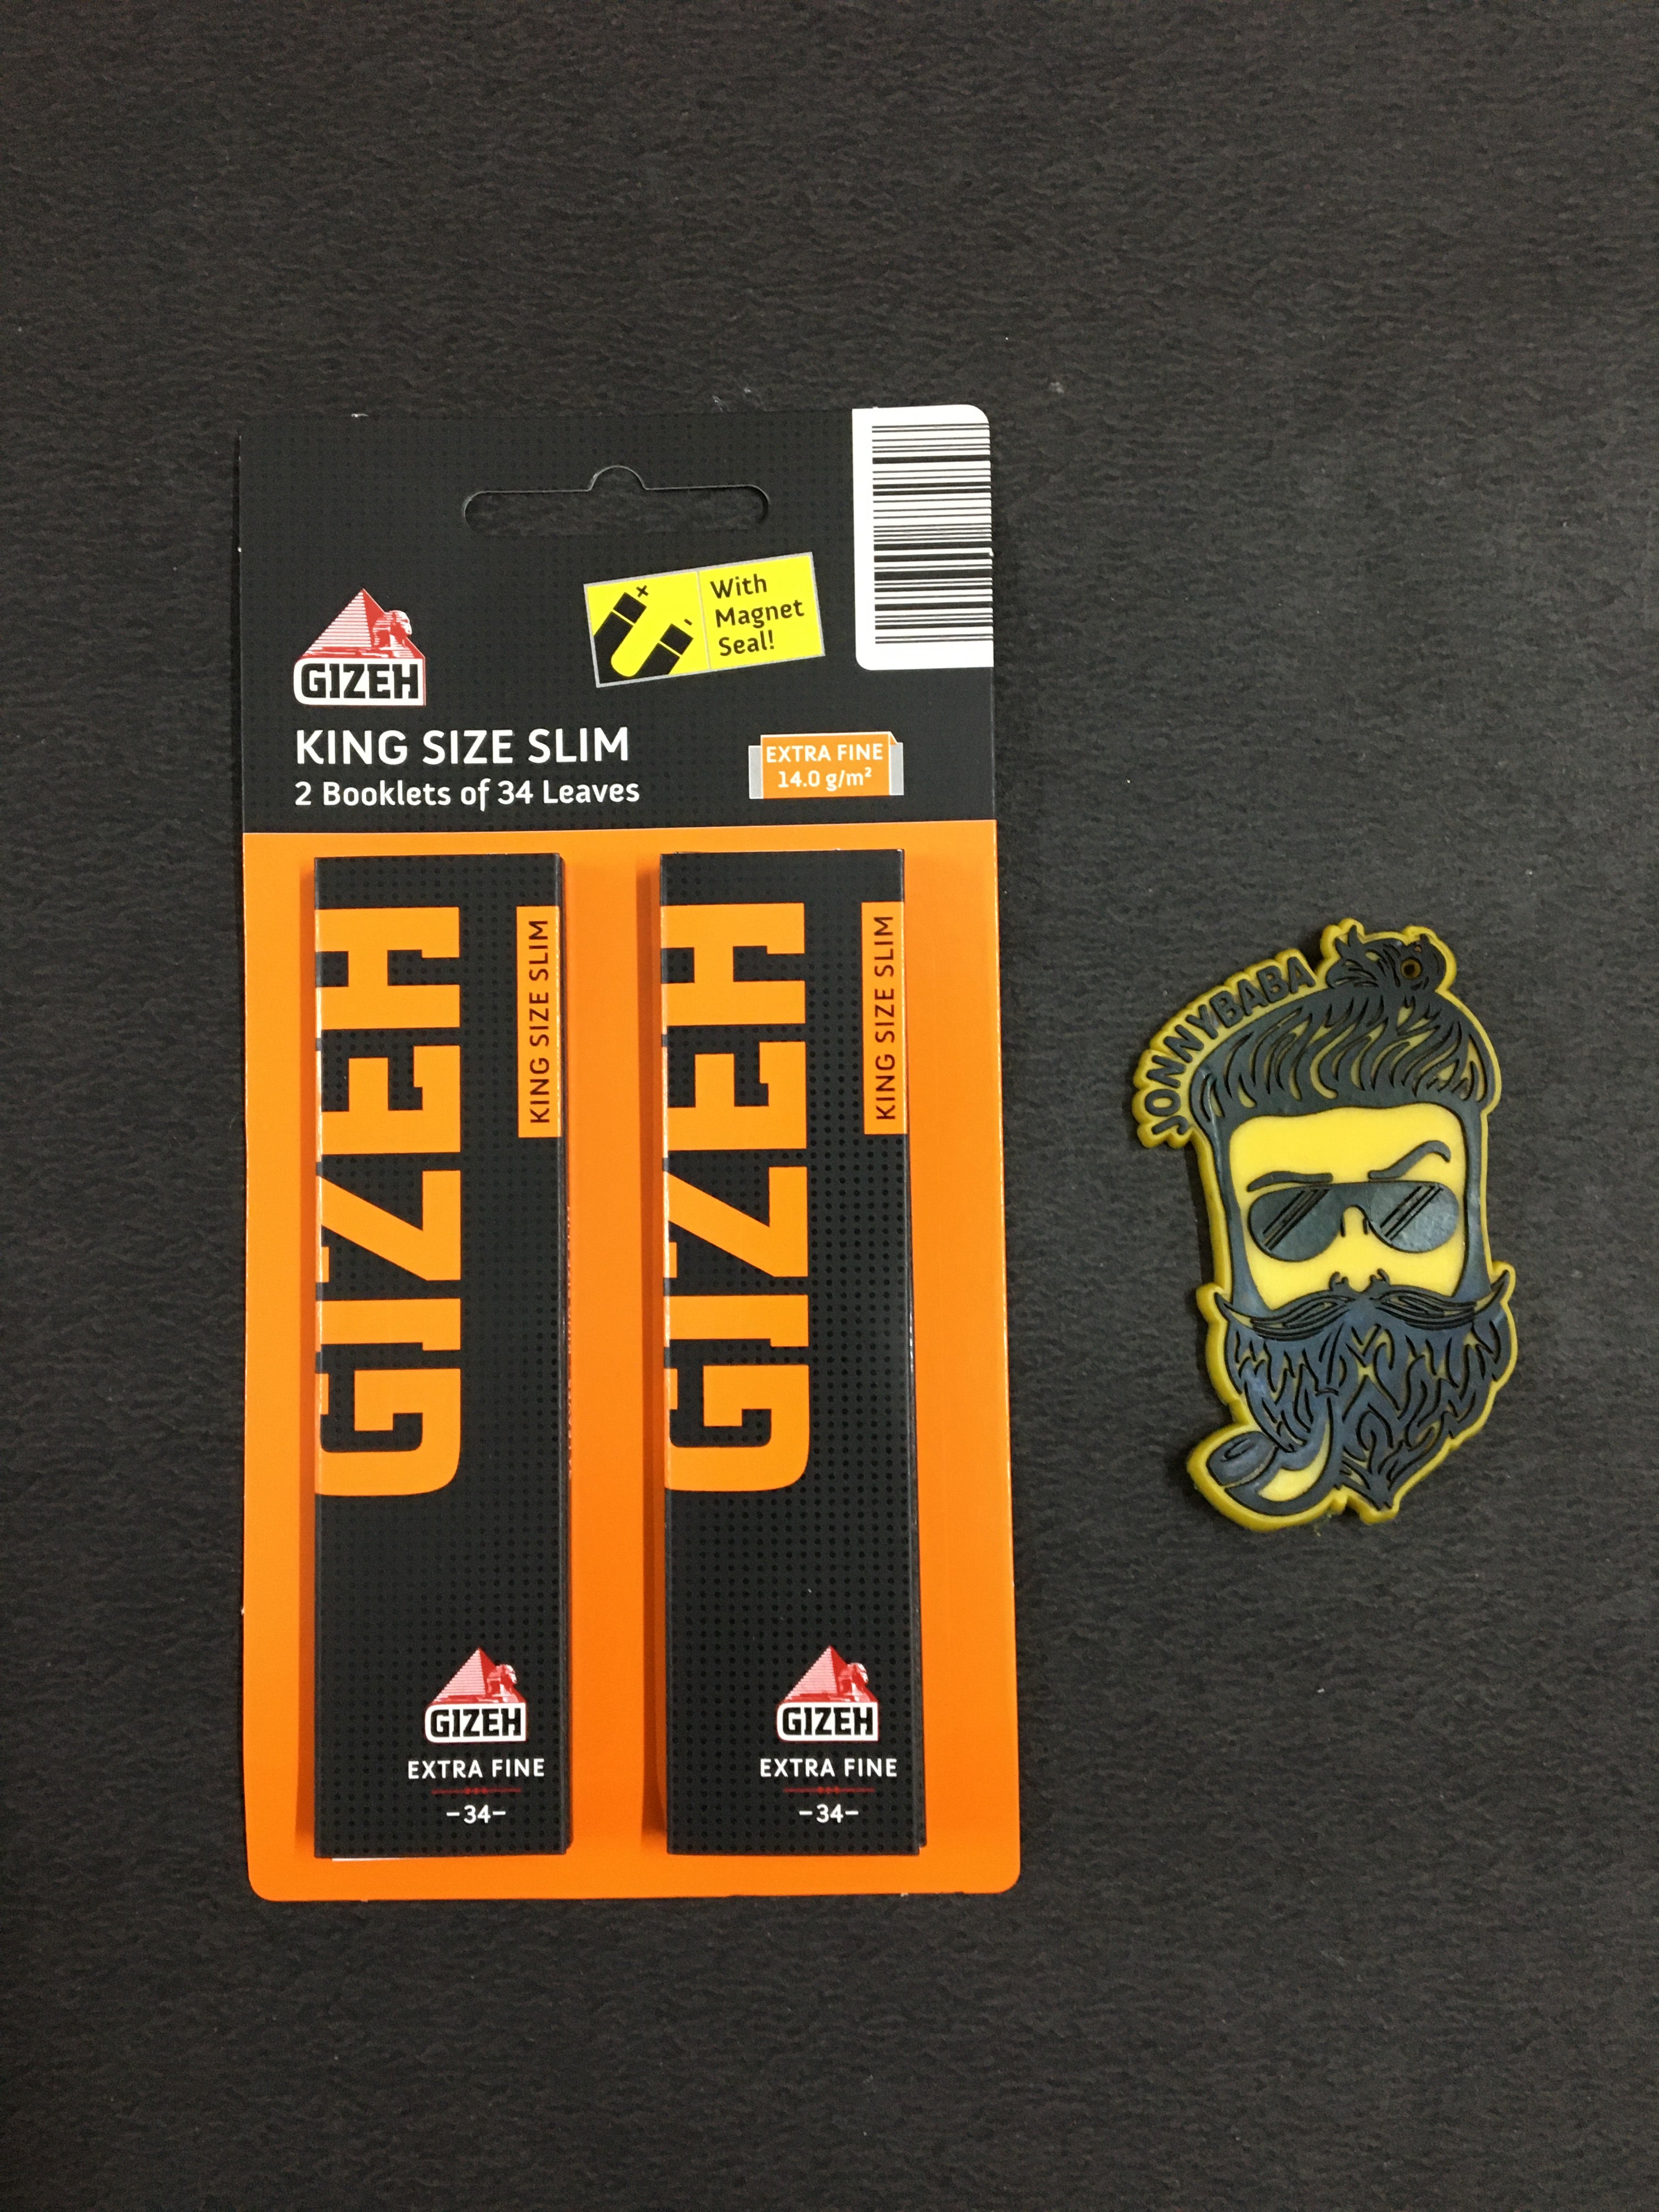 Gizeh extra fine pack of 2 available on Jonnybaba lifestyle 